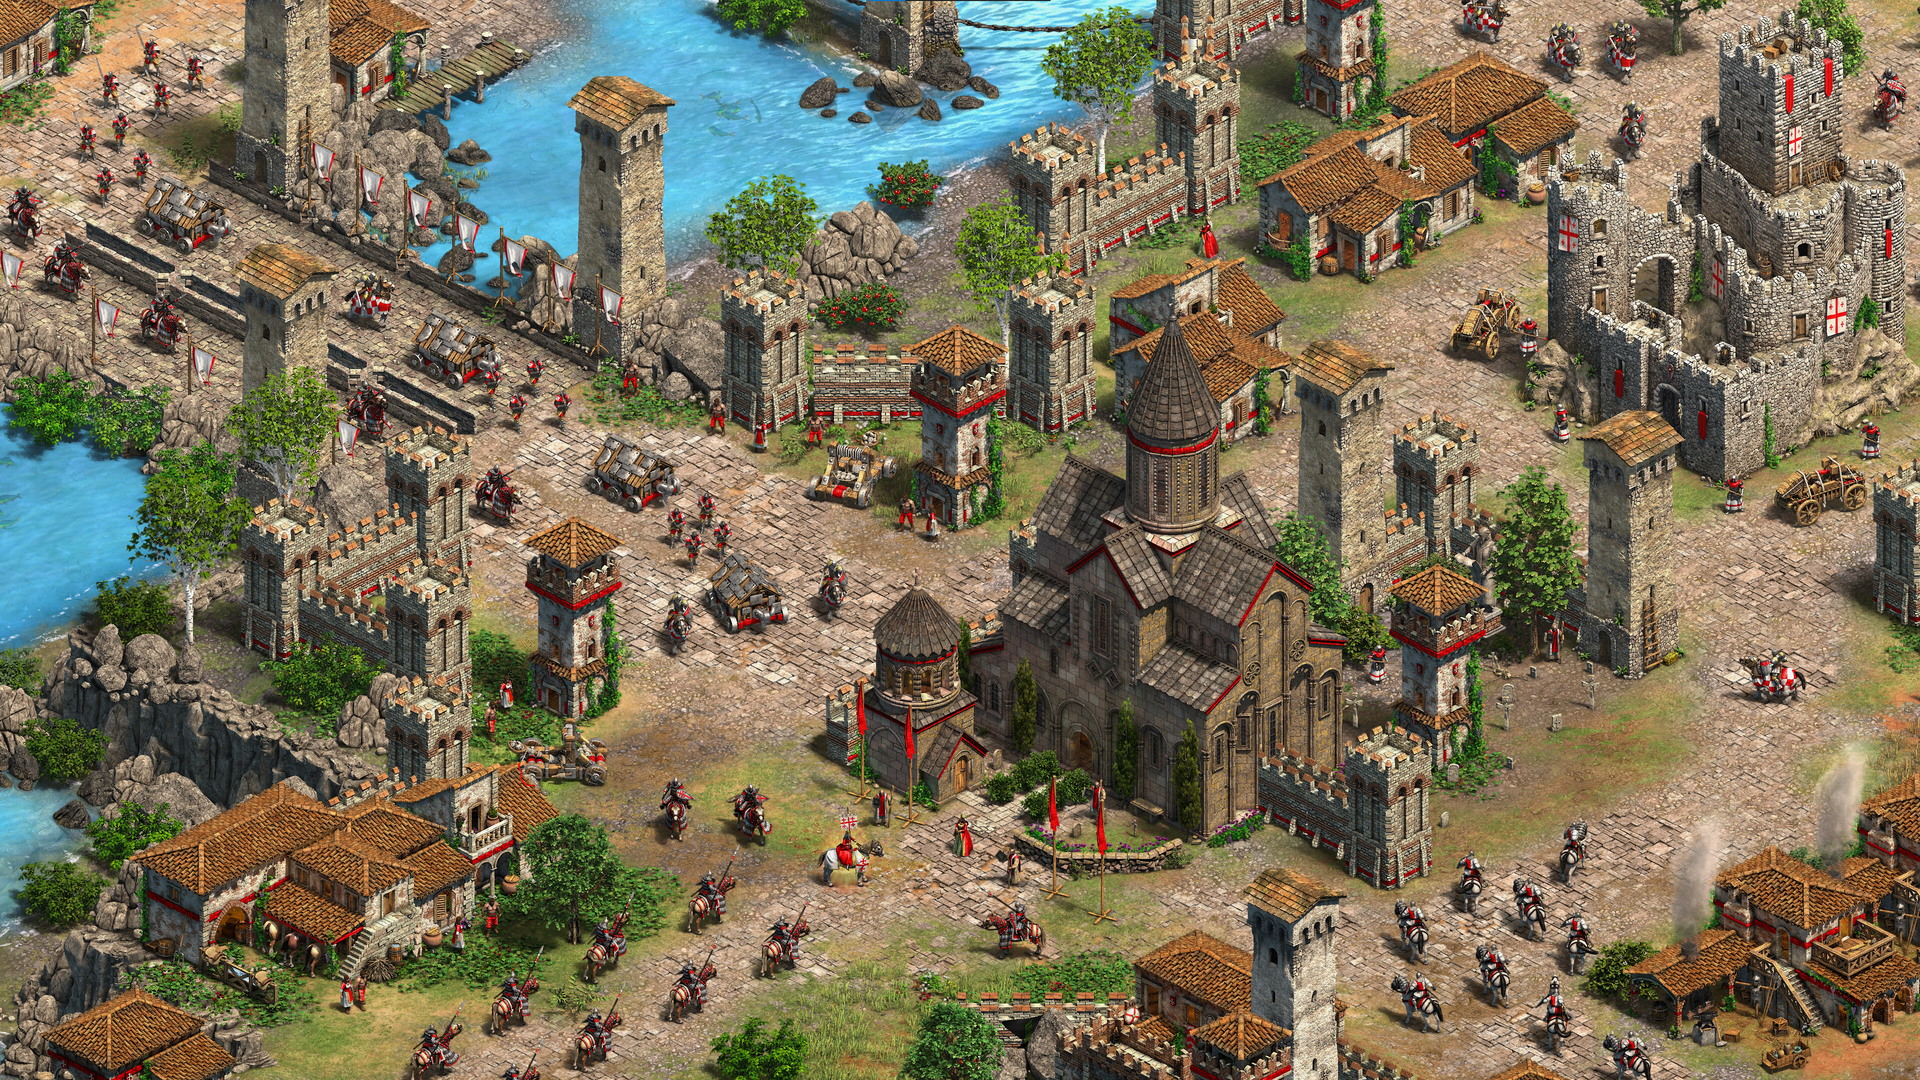 Age of Empires II: Definitive Edition - The Mountain Royals - screenshot 1